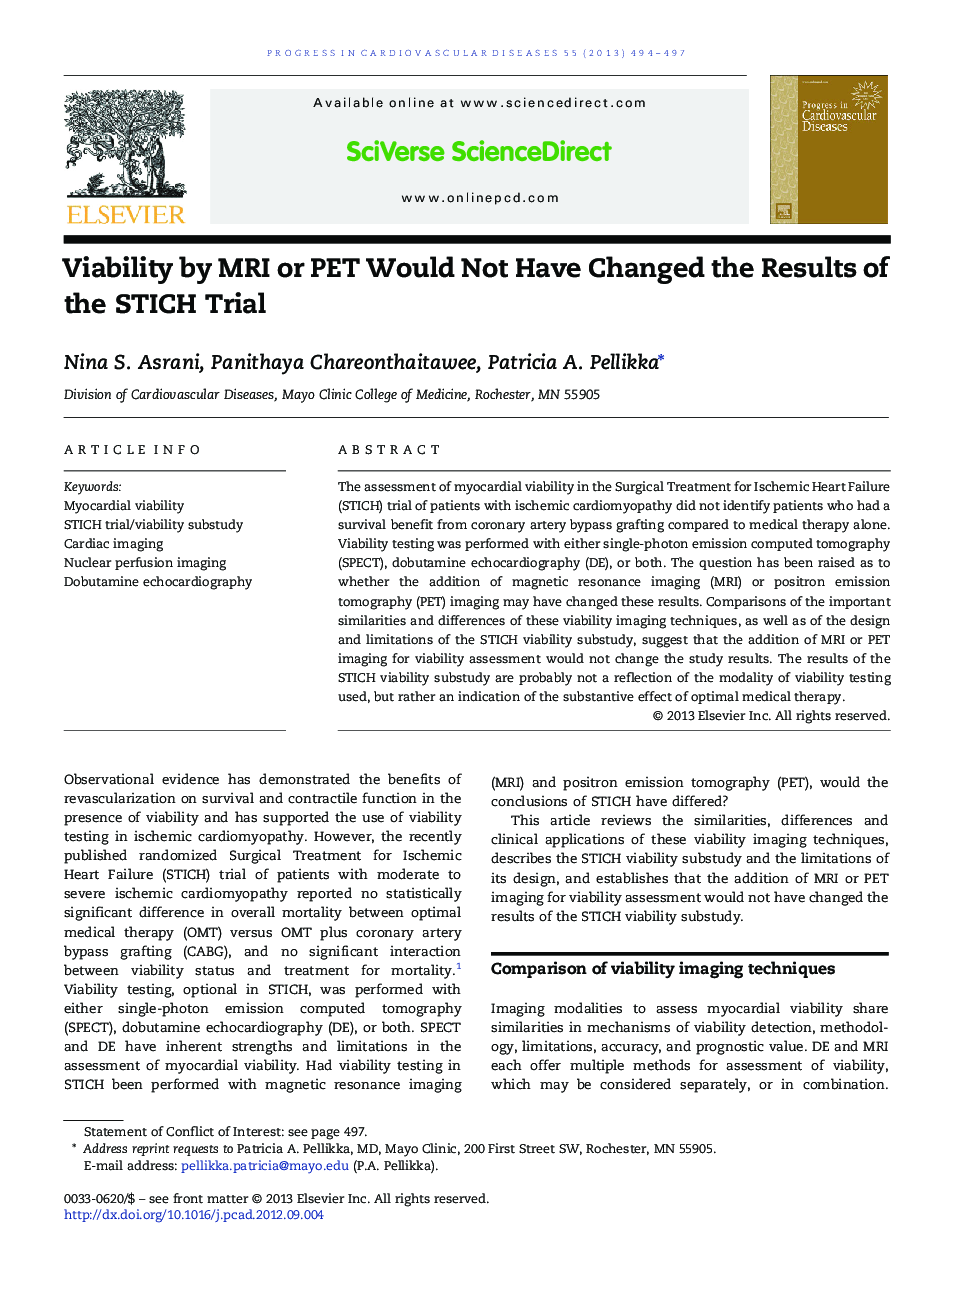 Viability by MRI or PET Would Not Have Changed the Results of the STICH Trial 